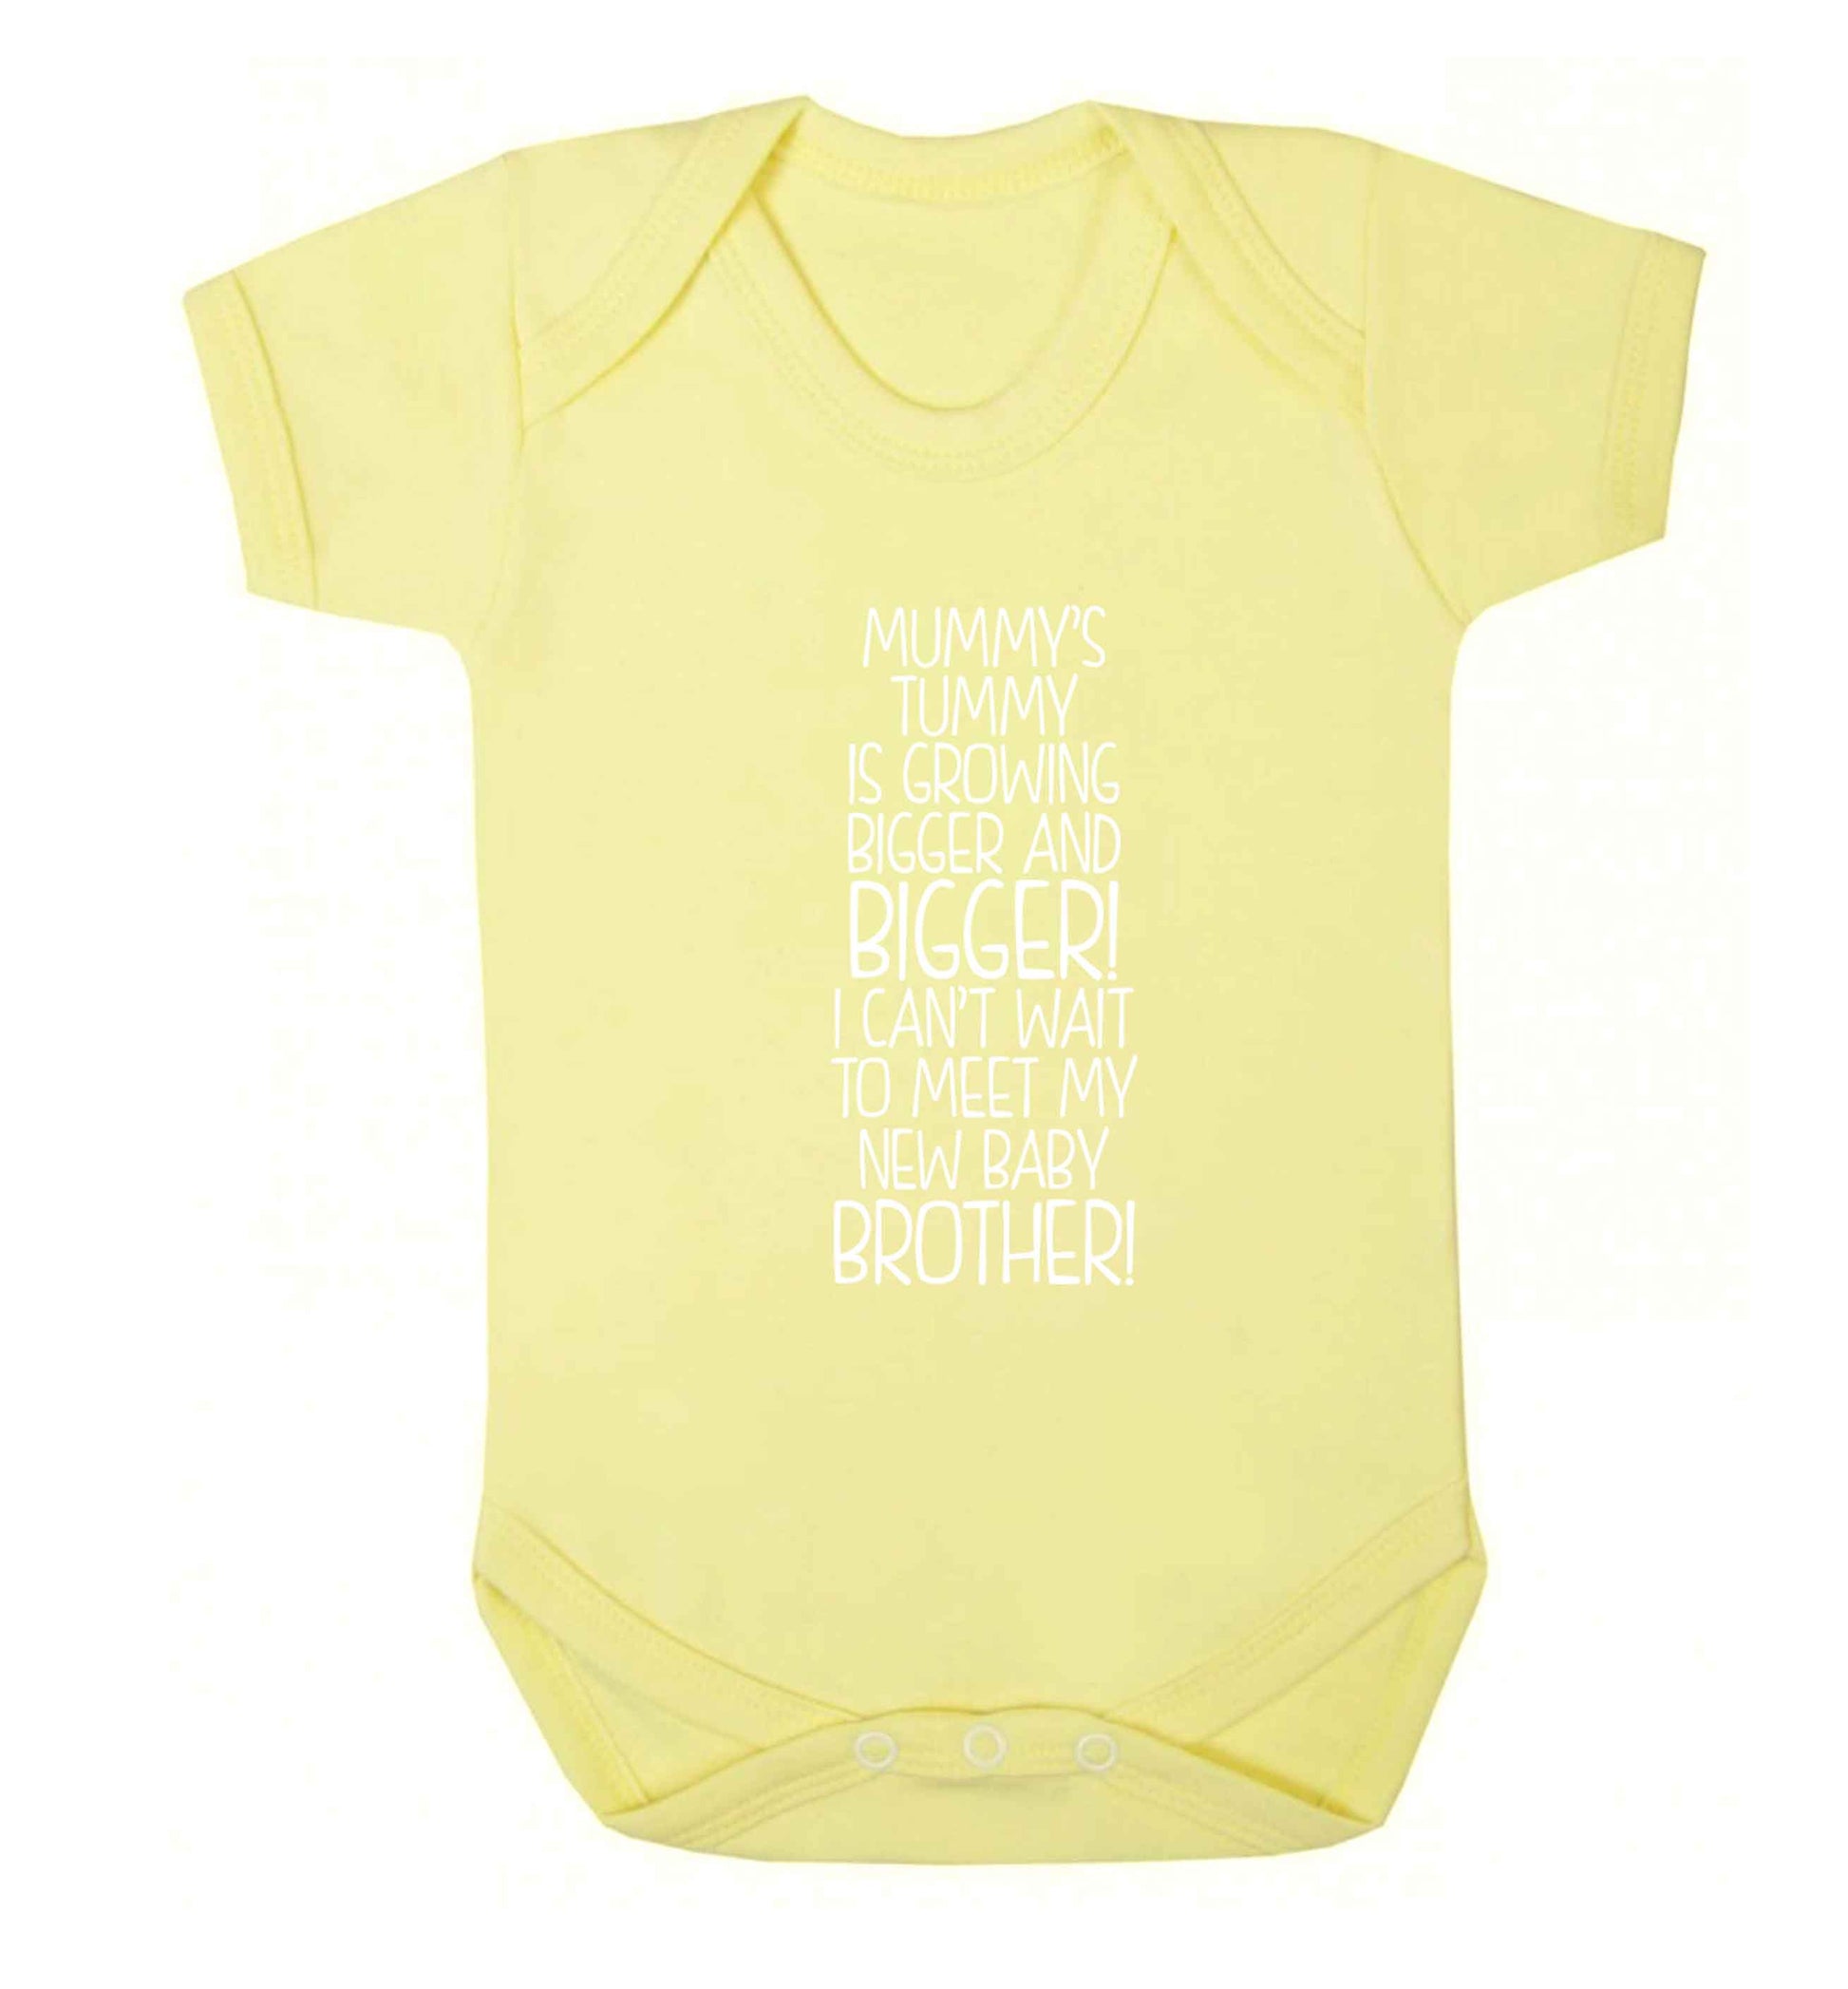 Mummy's tummy is growing bigger and bigger I can't wait to meet my new baby brother! Baby Vest pale yellow 18-24 months